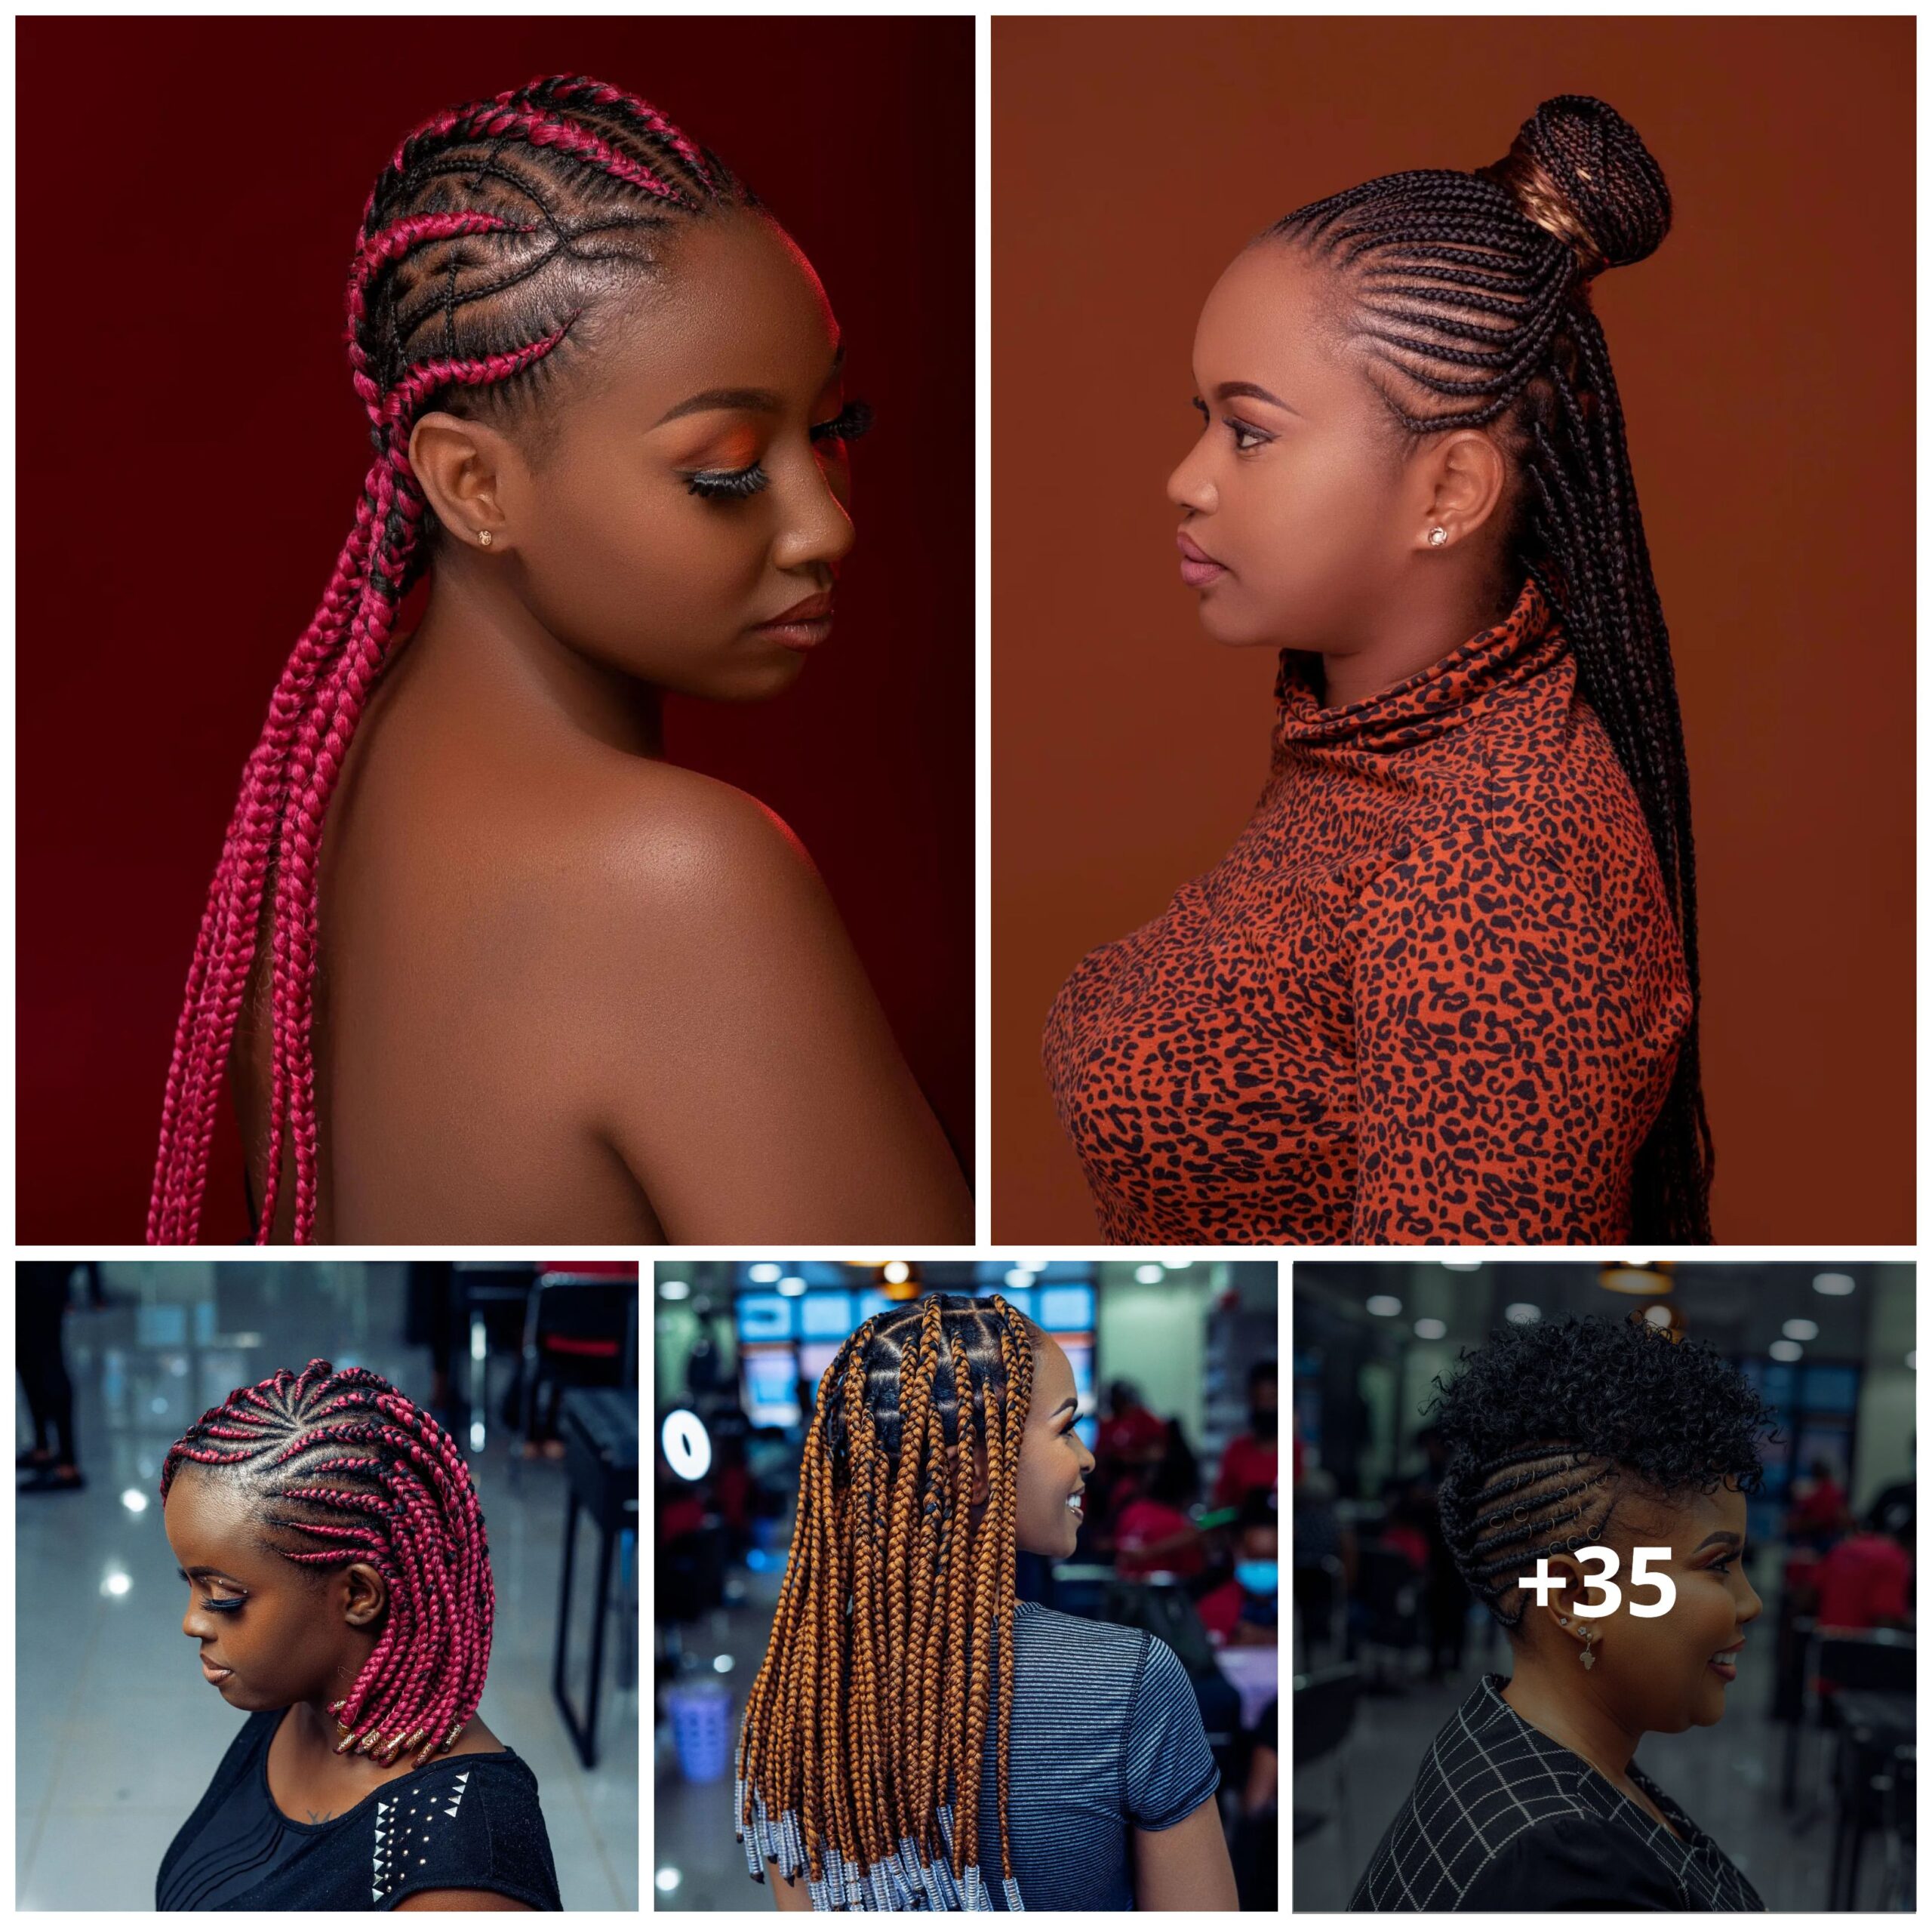 35+ PHOTOS: Release Your Inner Diva with Chic Braided Hairstyles!